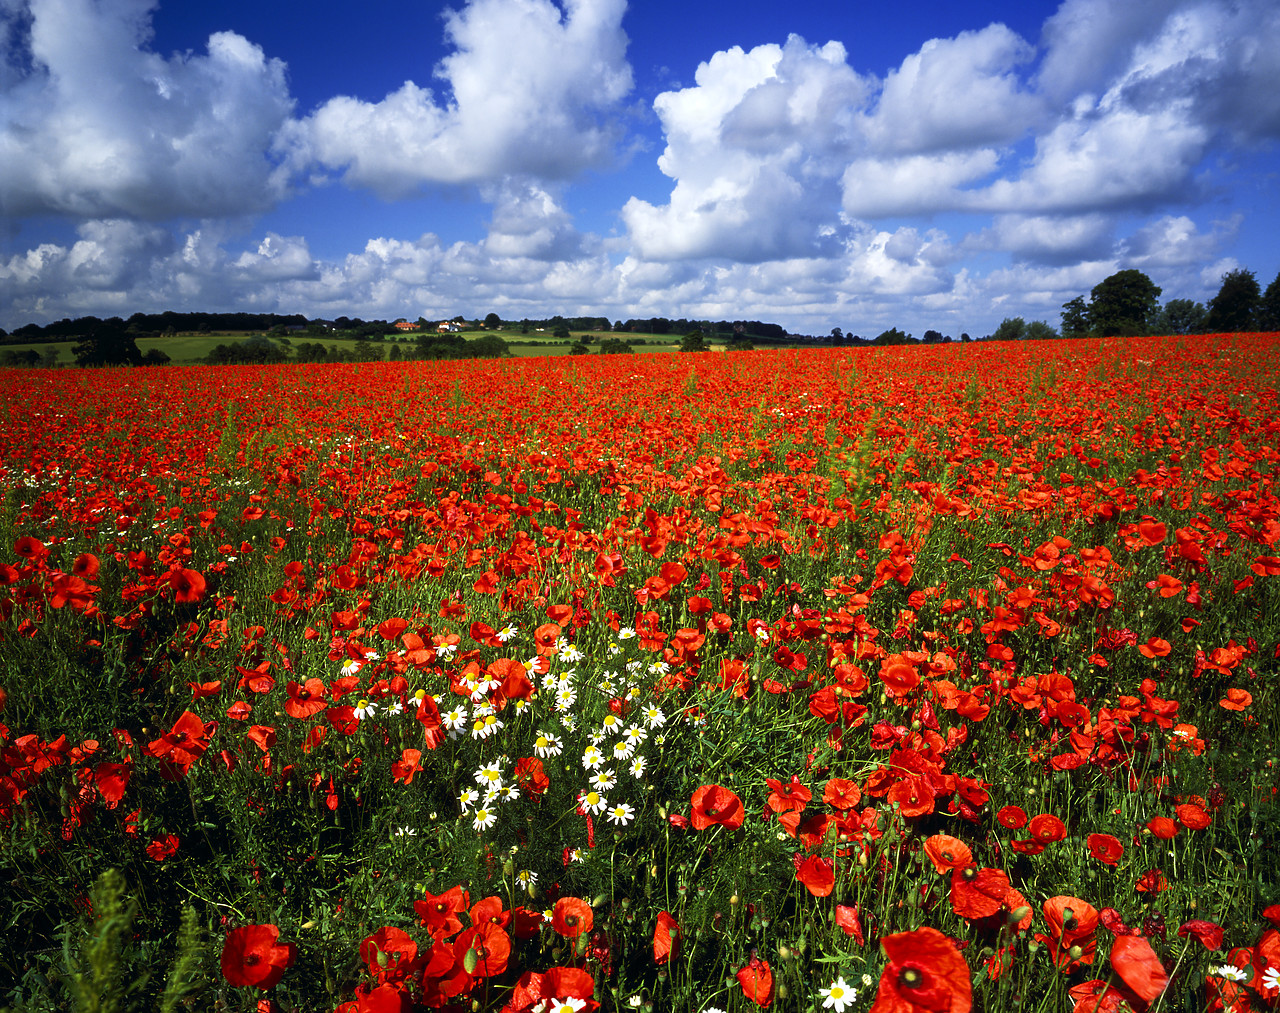 #881391-1 - Field of English Poppies, Norfolk, England